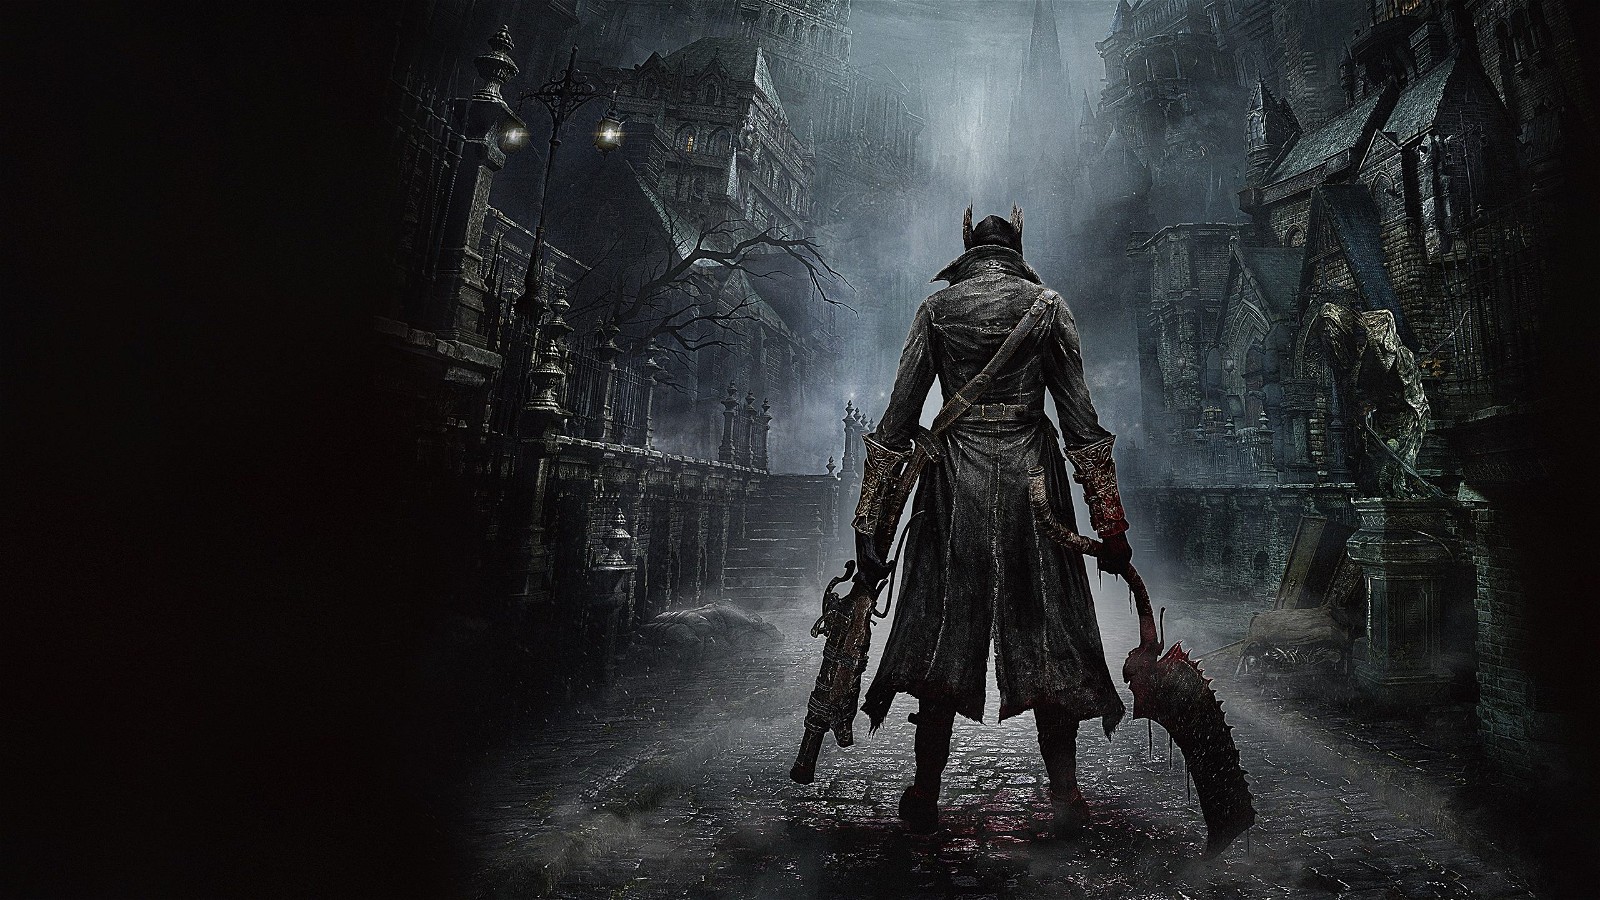 Fill the SOTE-sized hole in your heart with Bloodborne